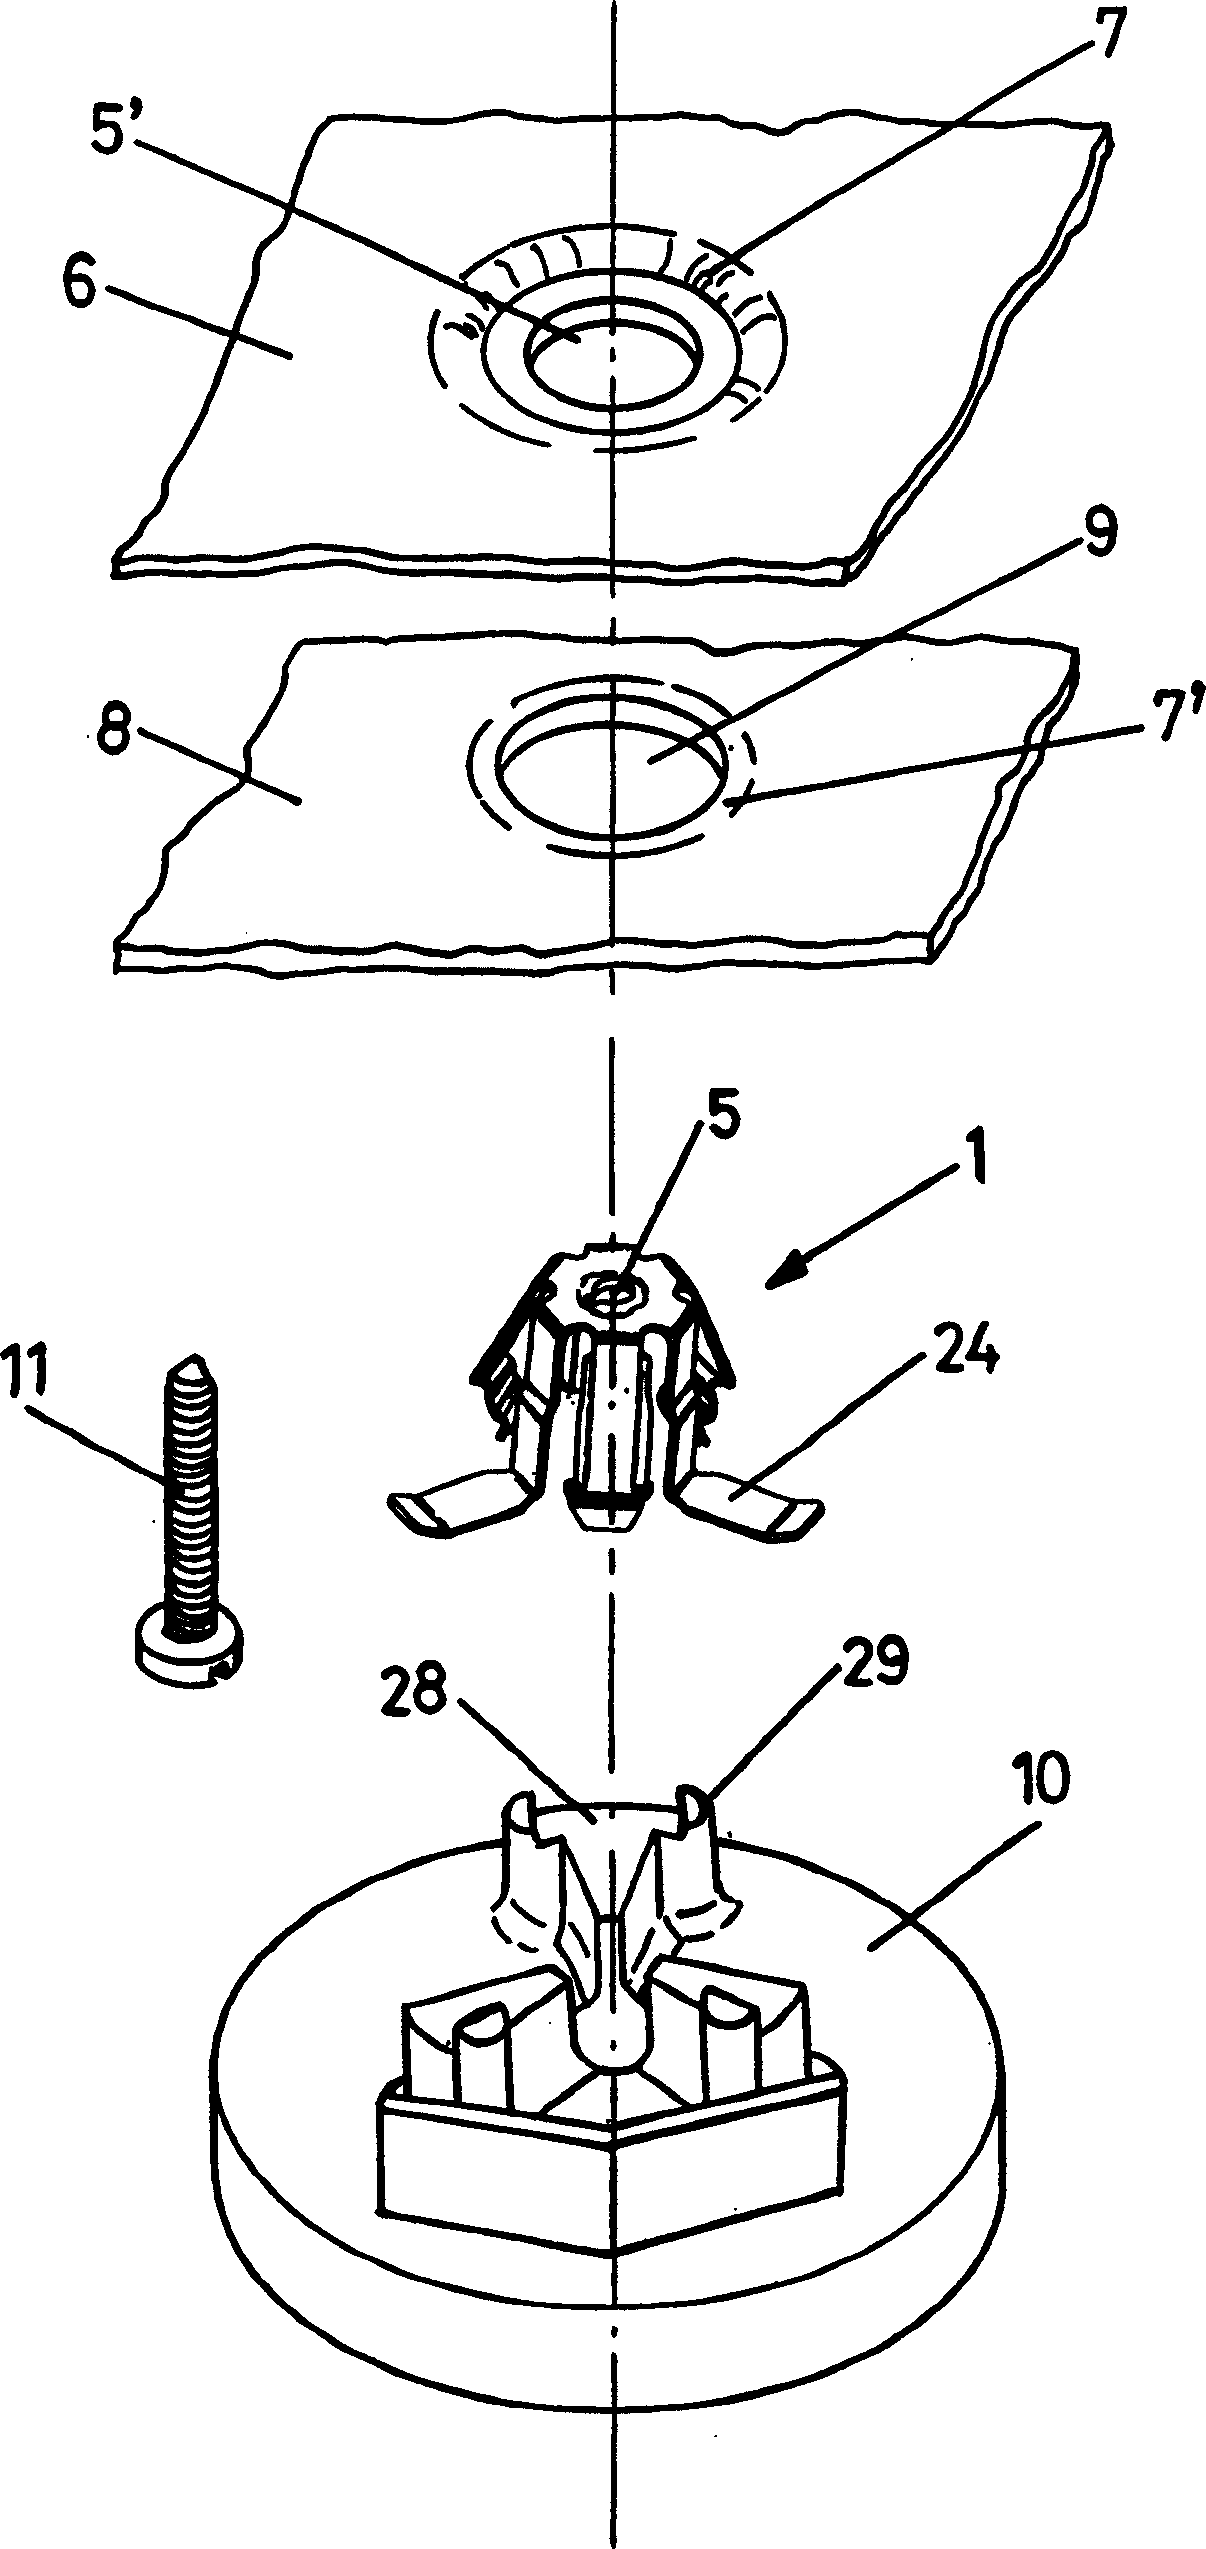 System for attaching accessories to a vehicle's bodywork using clips